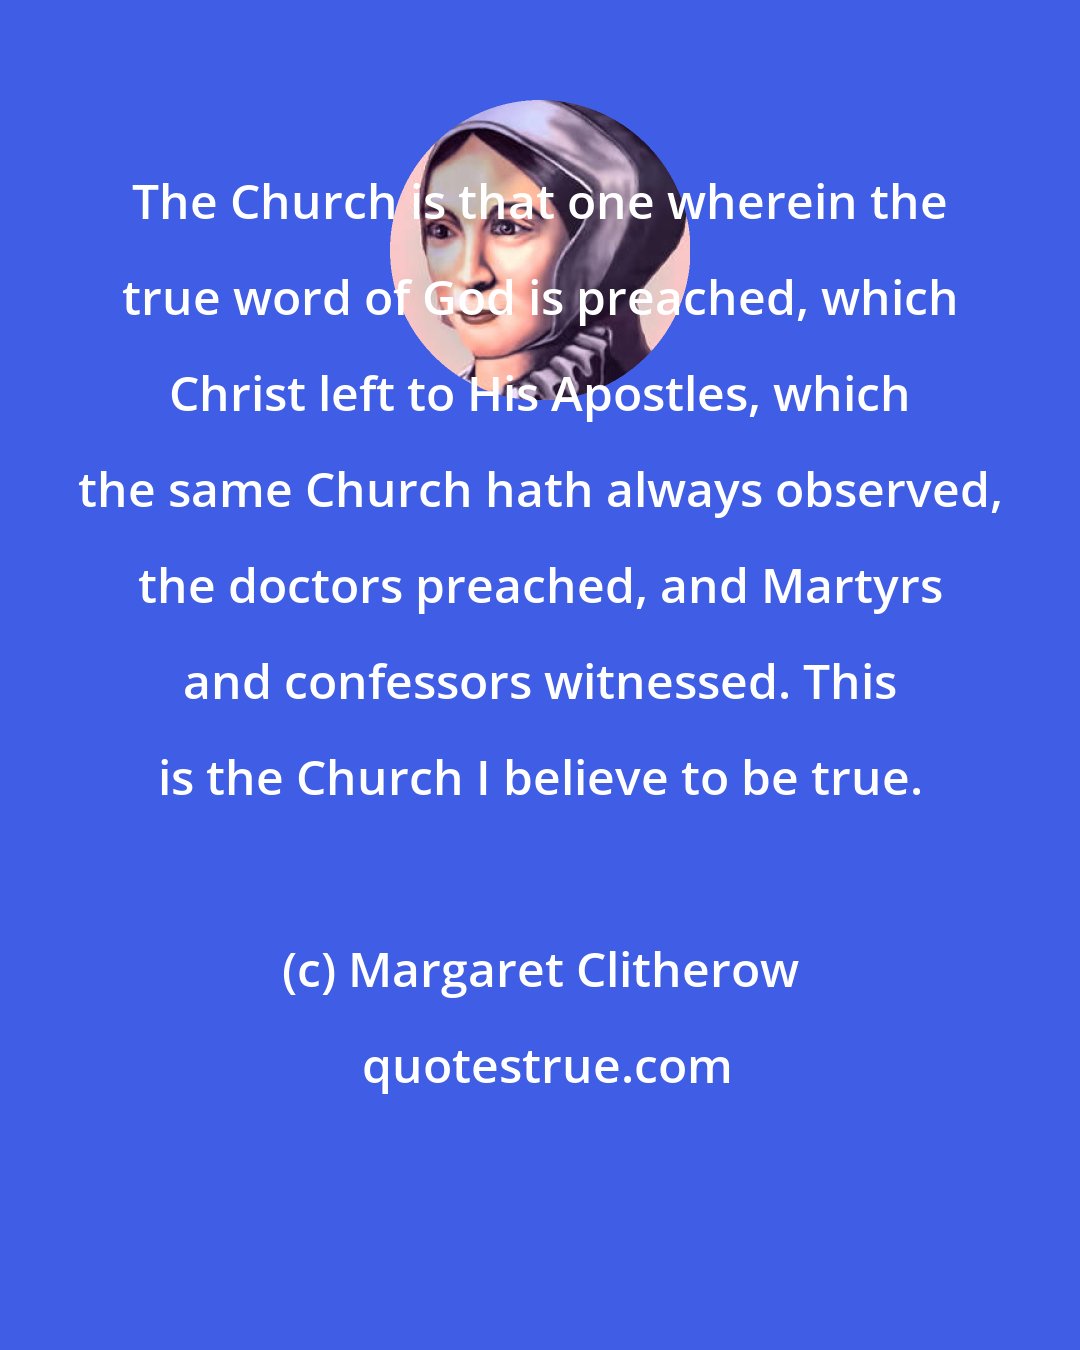 Margaret Clitherow: The Church is that one wherein the true word of God is preached, which Christ left to His Apostles, which the same Church hath always observed, the doctors preached, and Martyrs and confessors witnessed. This is the Church I believe to be true.